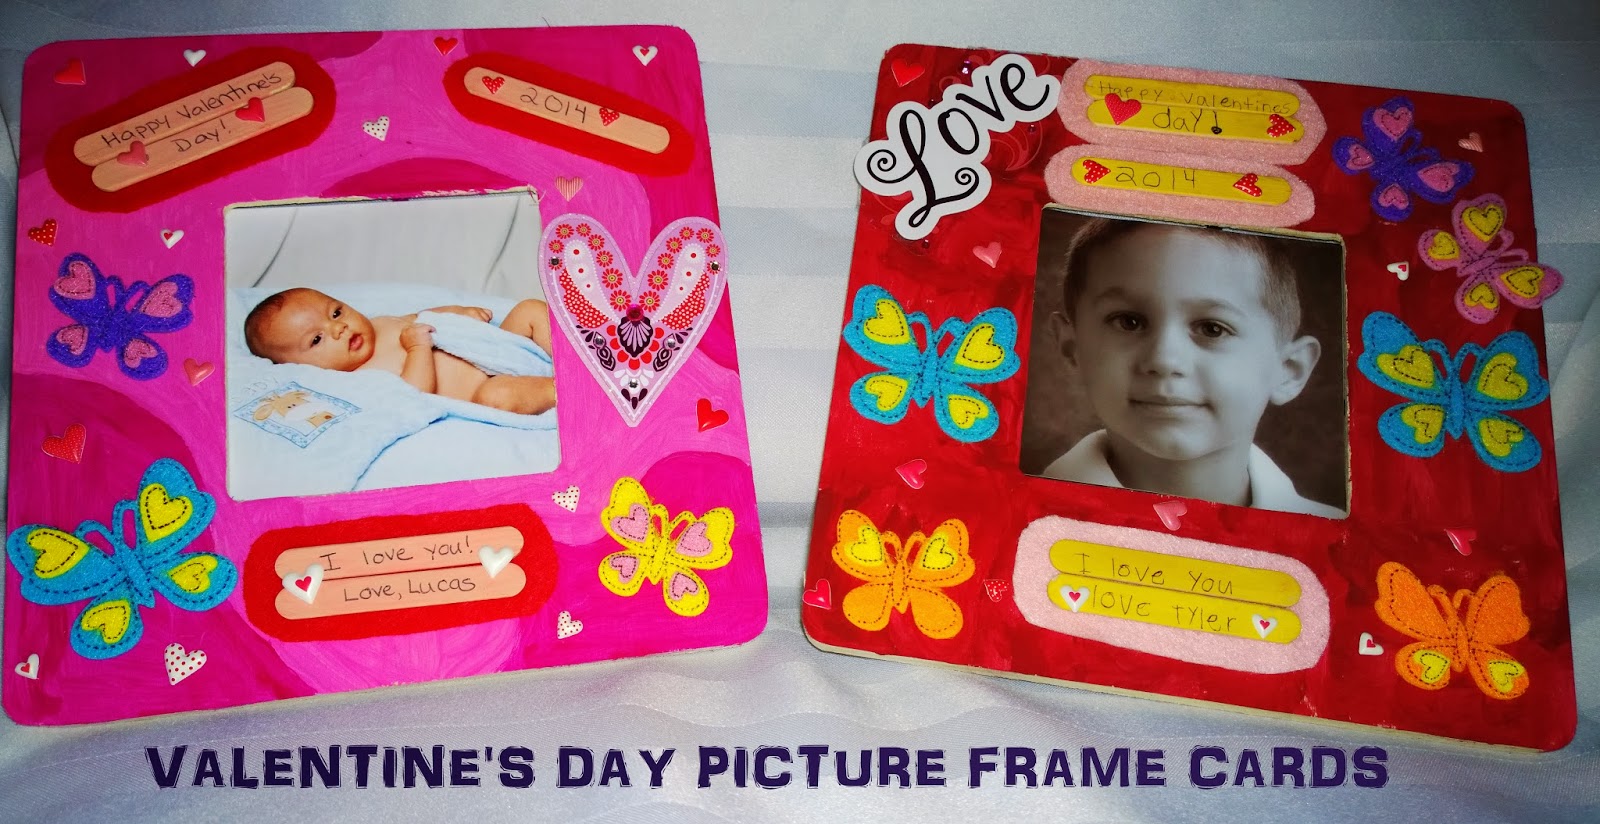 Valentine's Day Picture Frame Cards #shop